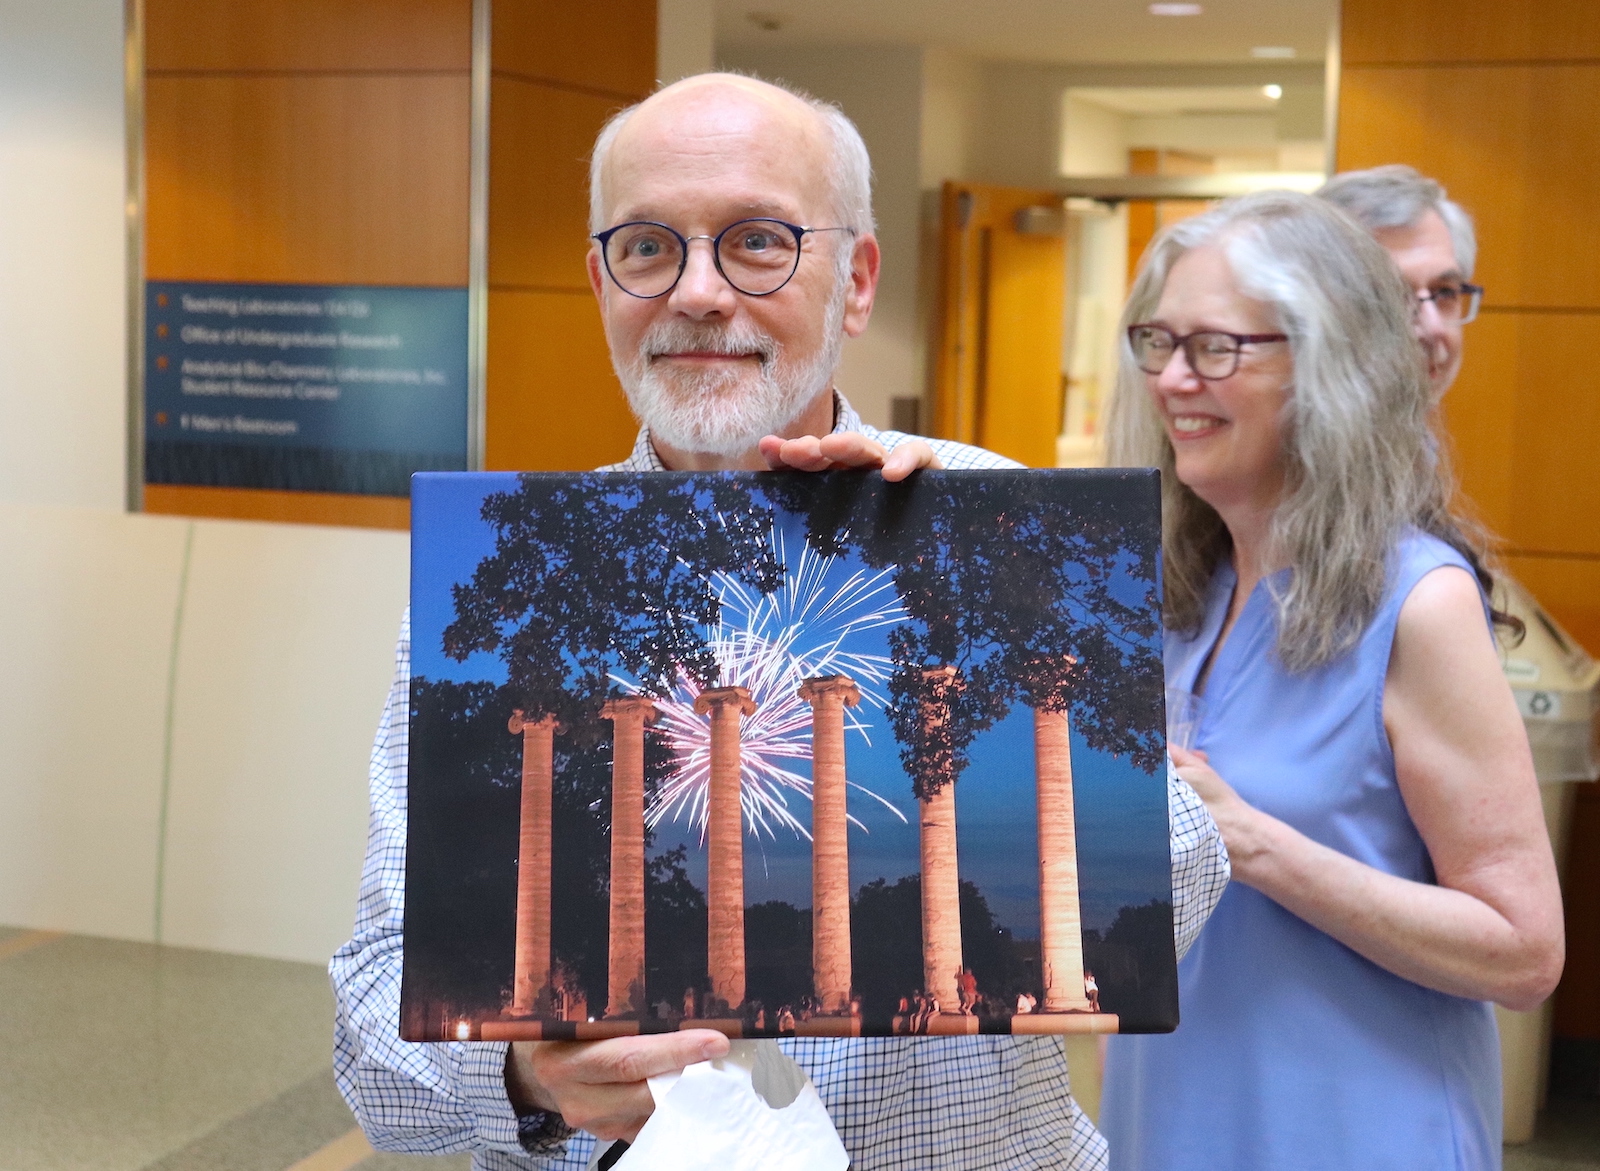 Thomas Phllips holds up a painting of Columns with fireworks over them.